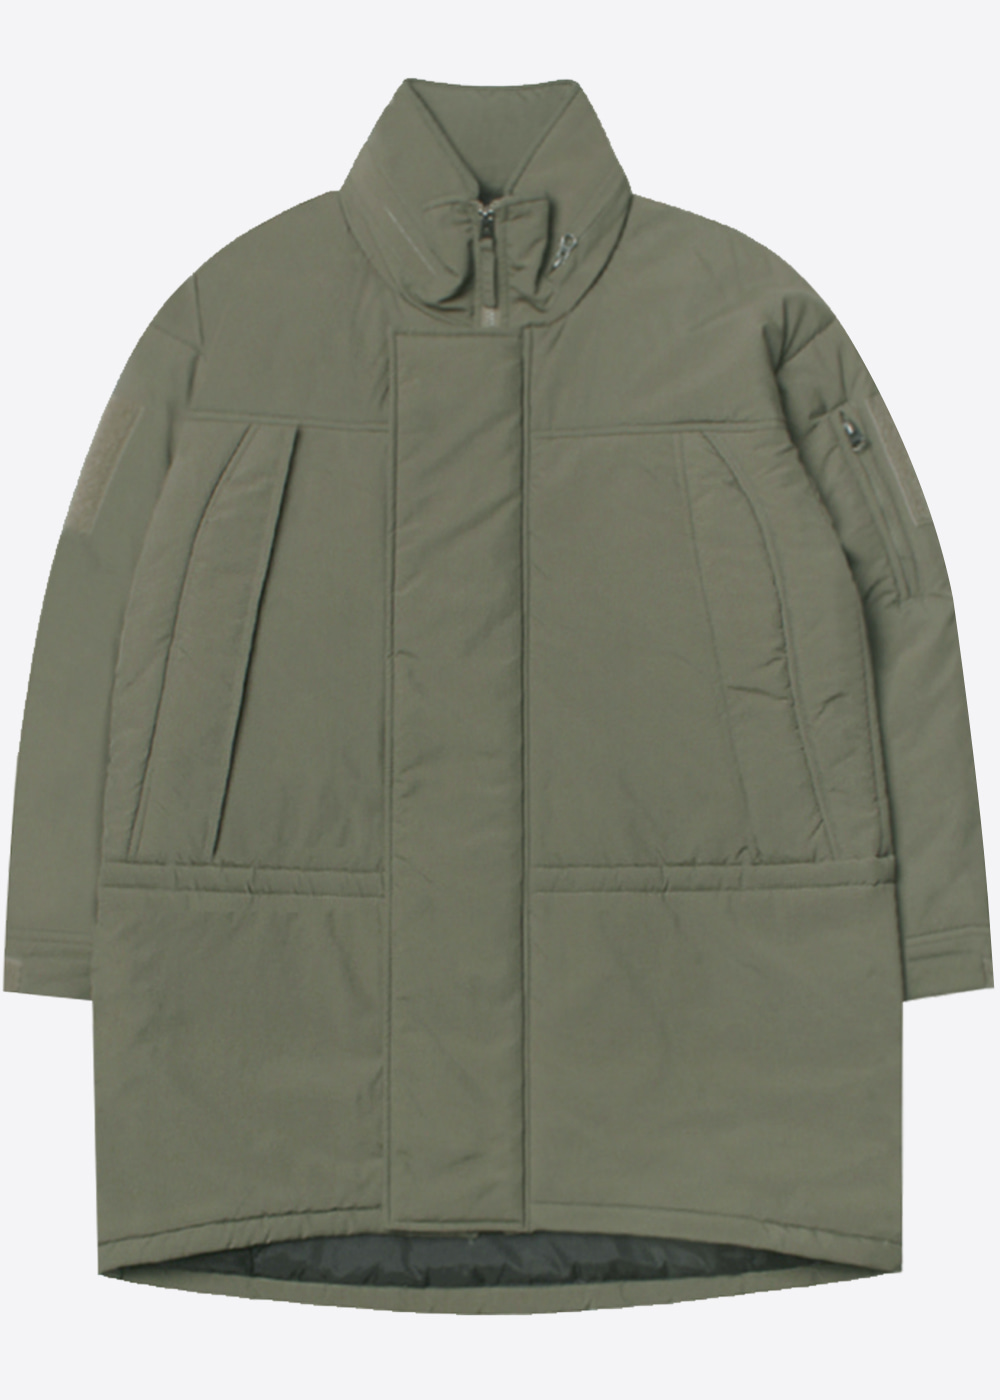 COEN BY UNITED ARROWS’over fit’ecwcs lv7 motive down parka